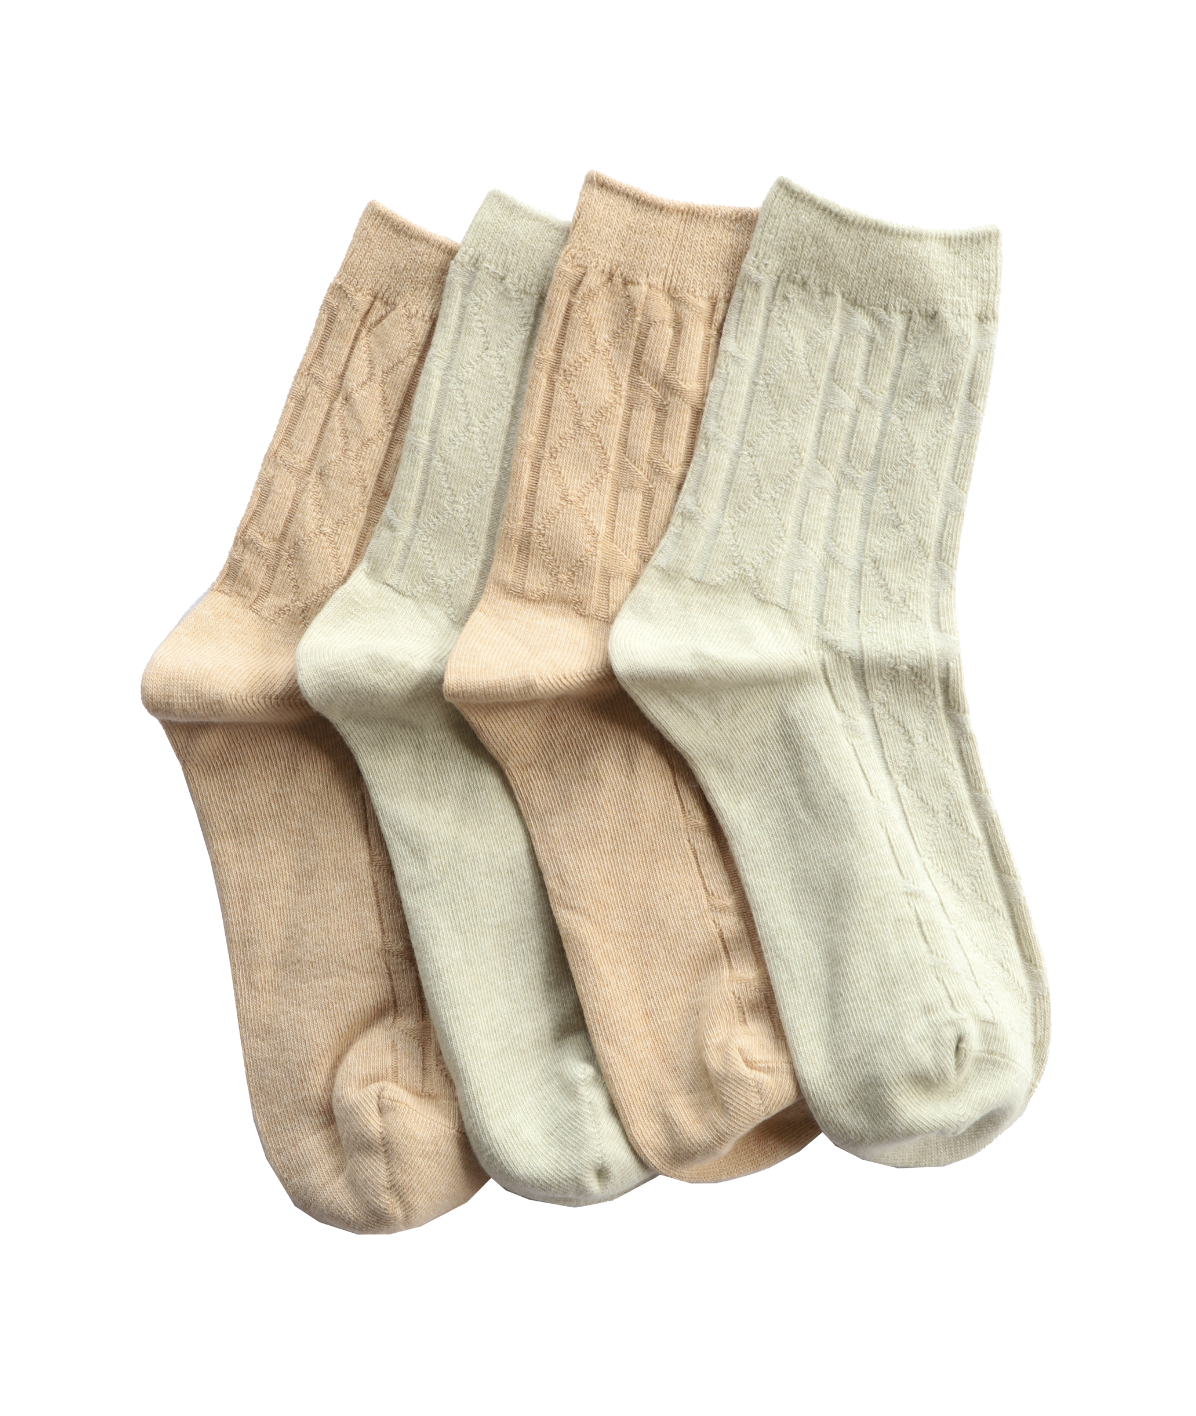 2 pairs cable knit sock -Sage & Light Brown 